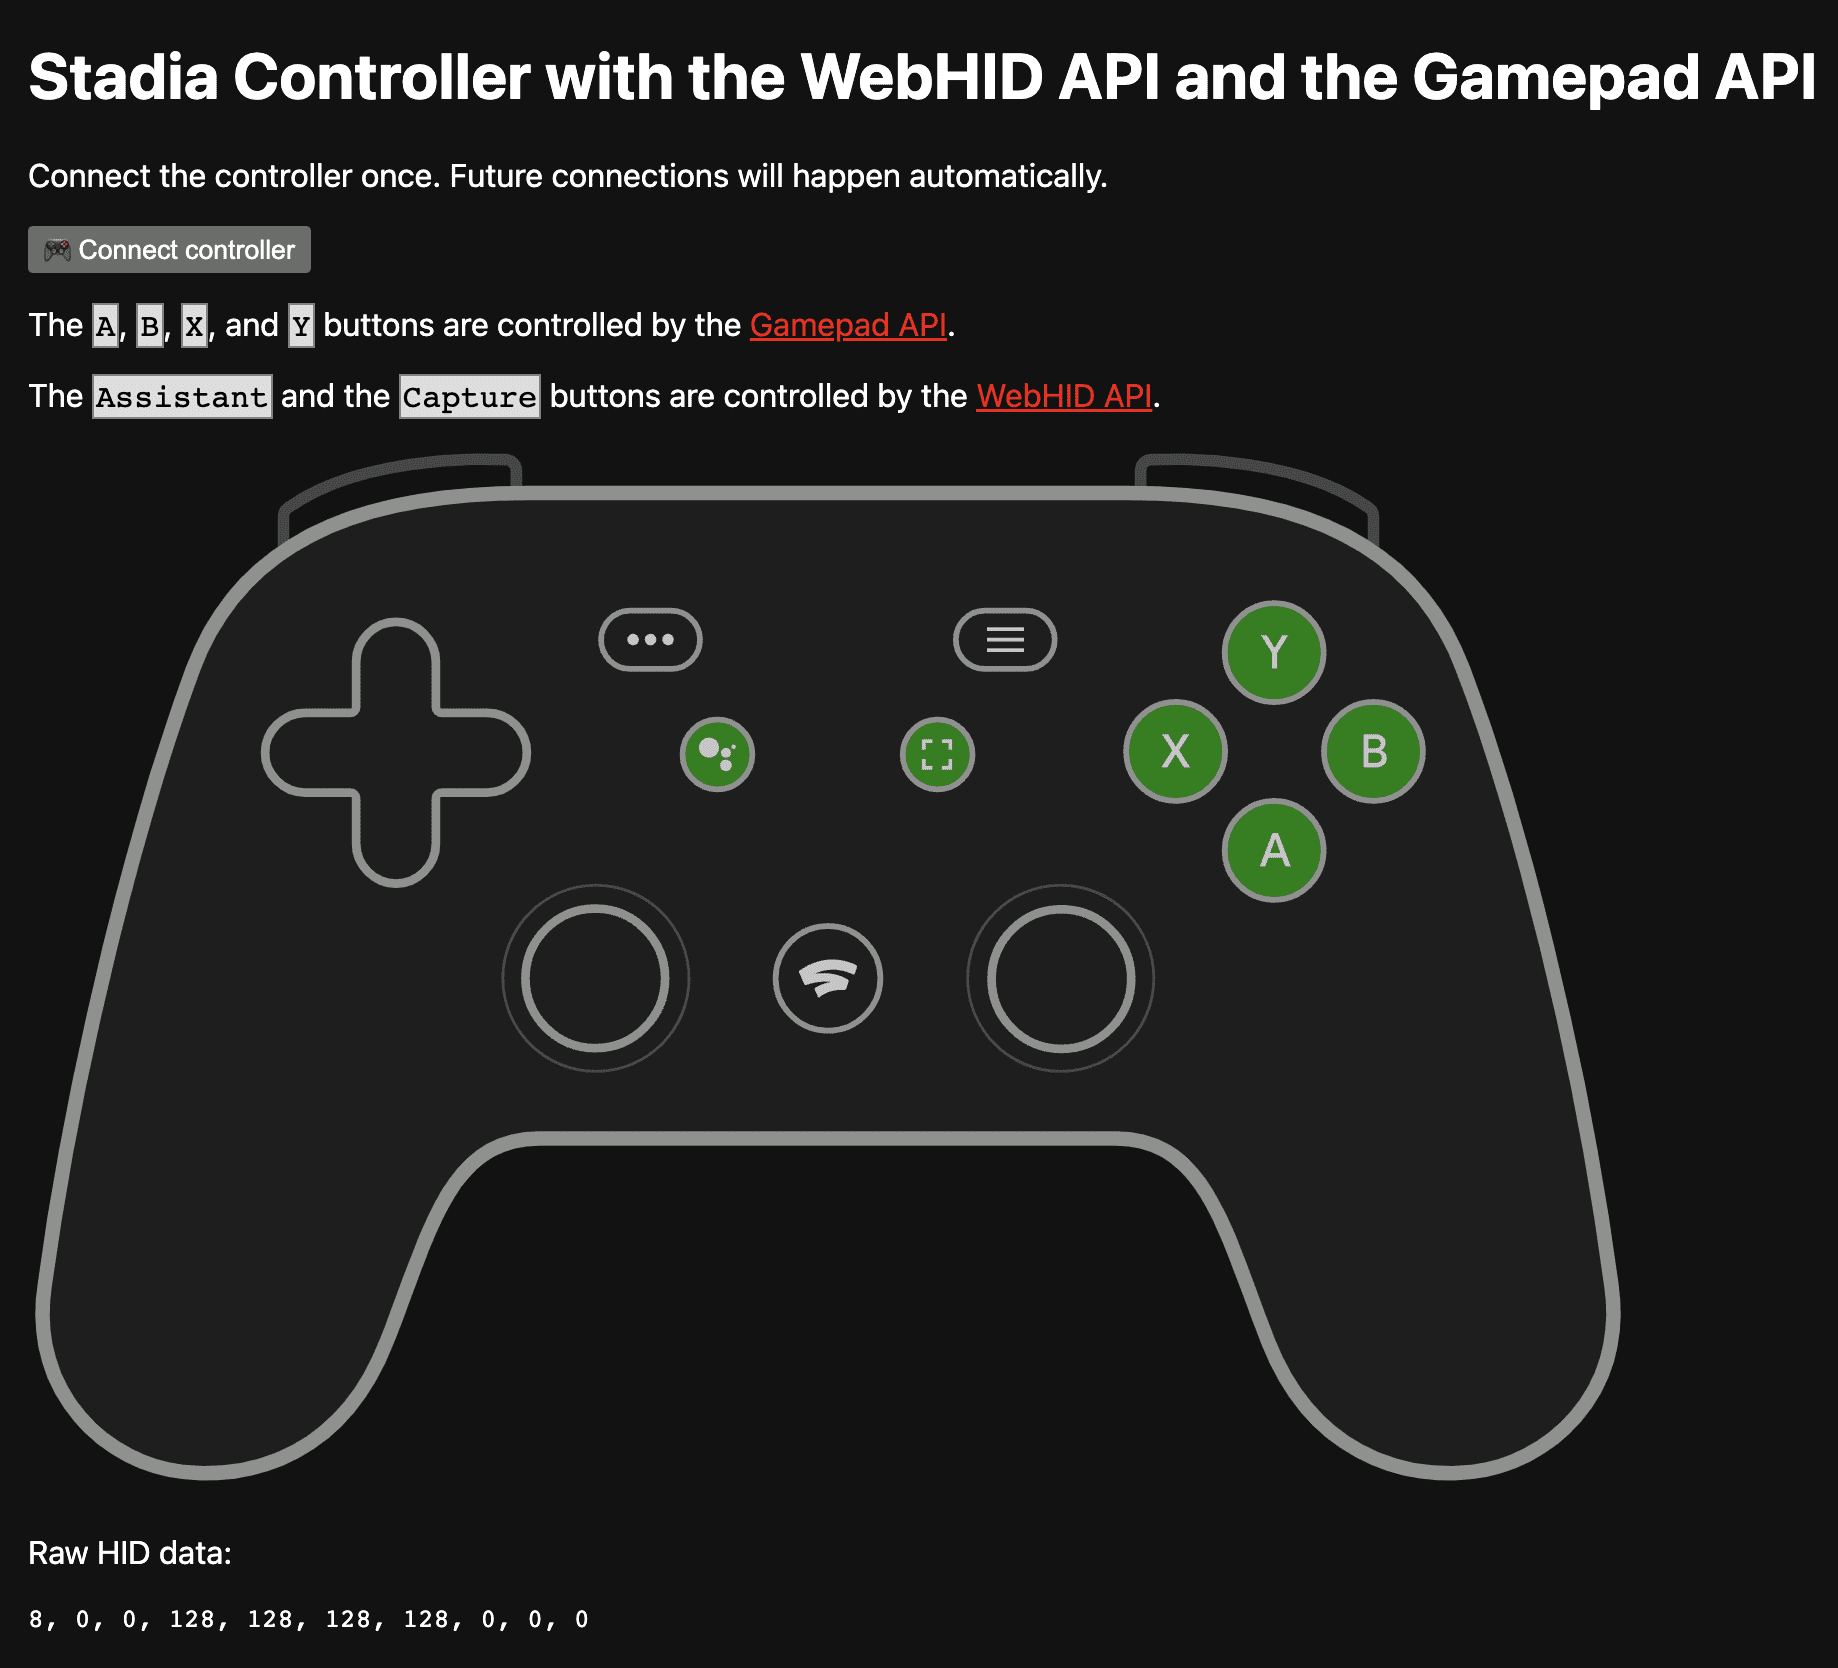 The demo app at https://stadia-controller-webhid-gamepad.glitch.me/ showing the A, B, X, and the Y buttons being controlled by the Gamepad API, and the Assistant and the Capture buttons being controlled by the WebHID API.